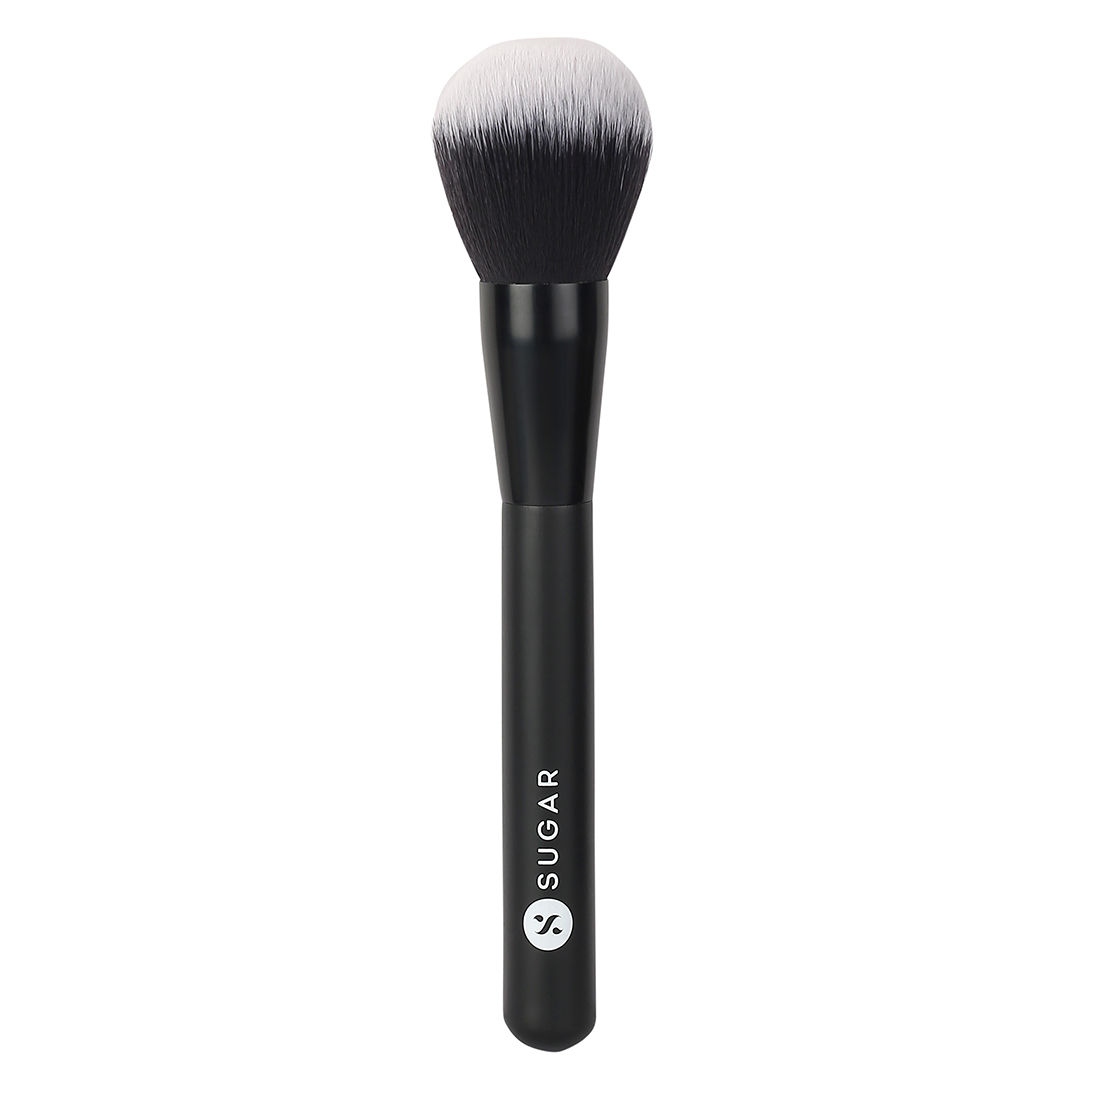 Buy SUGAR Cosmetics - Blend Trend - 007 Powder Brush (Brush For Easy Application of Powder) - Soft, Synthetic Bristles and Wooden Handle - Purplle